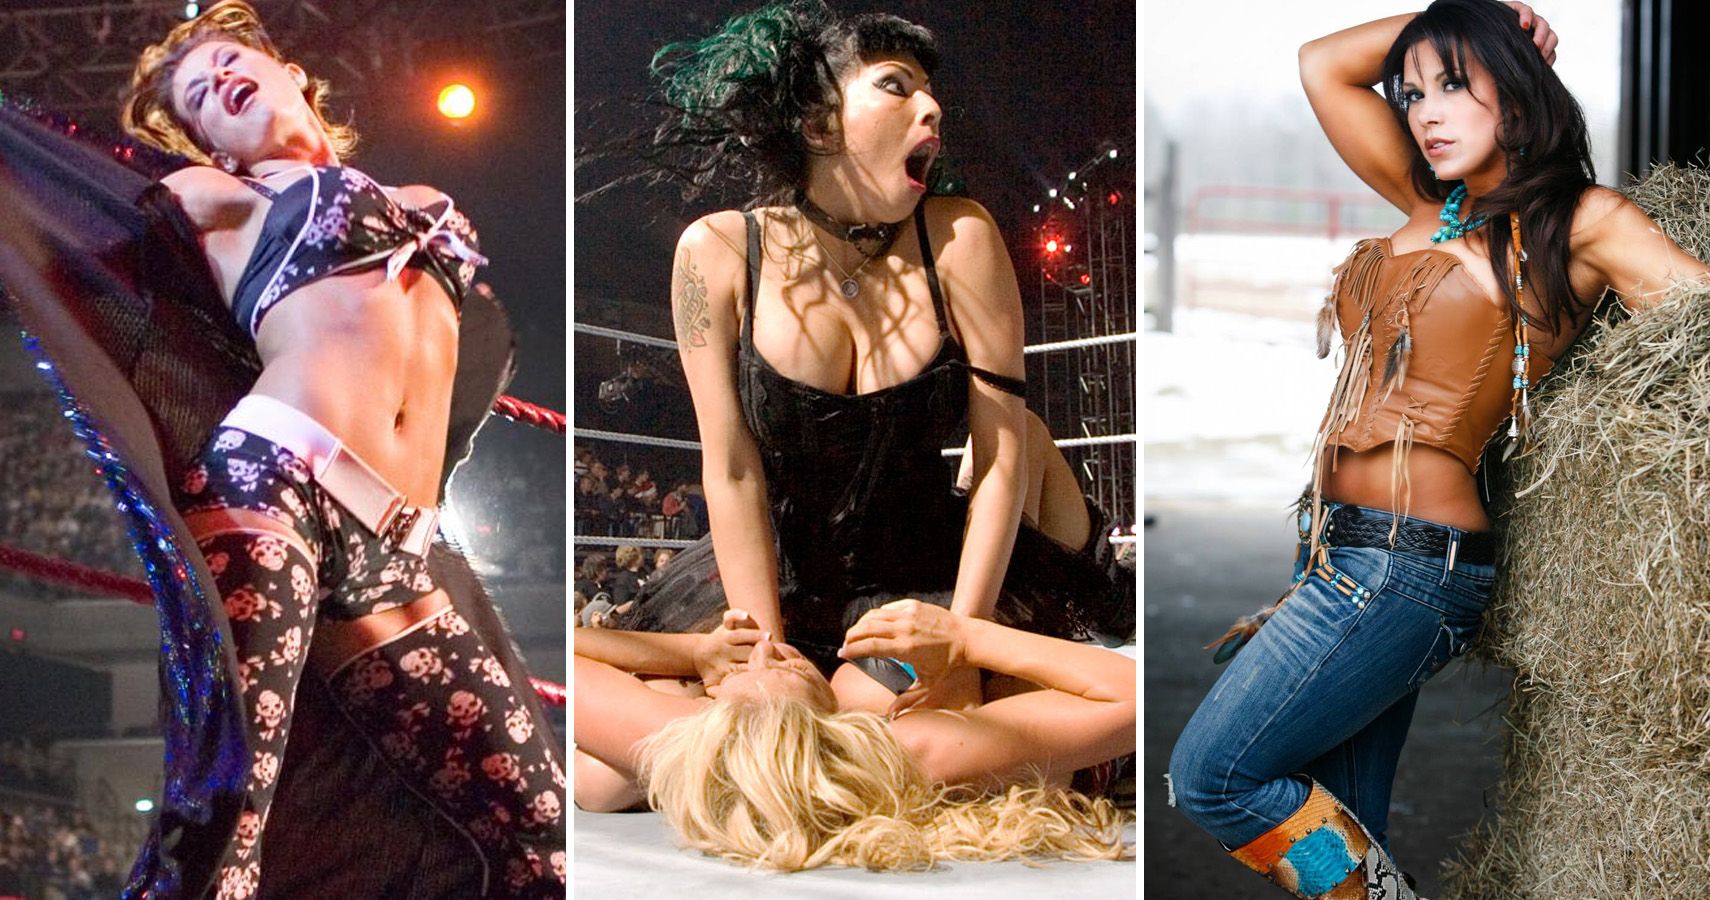 Wwe Divas Turned Porn Star - Wrestlers Who Worked In Porn | TheSportster